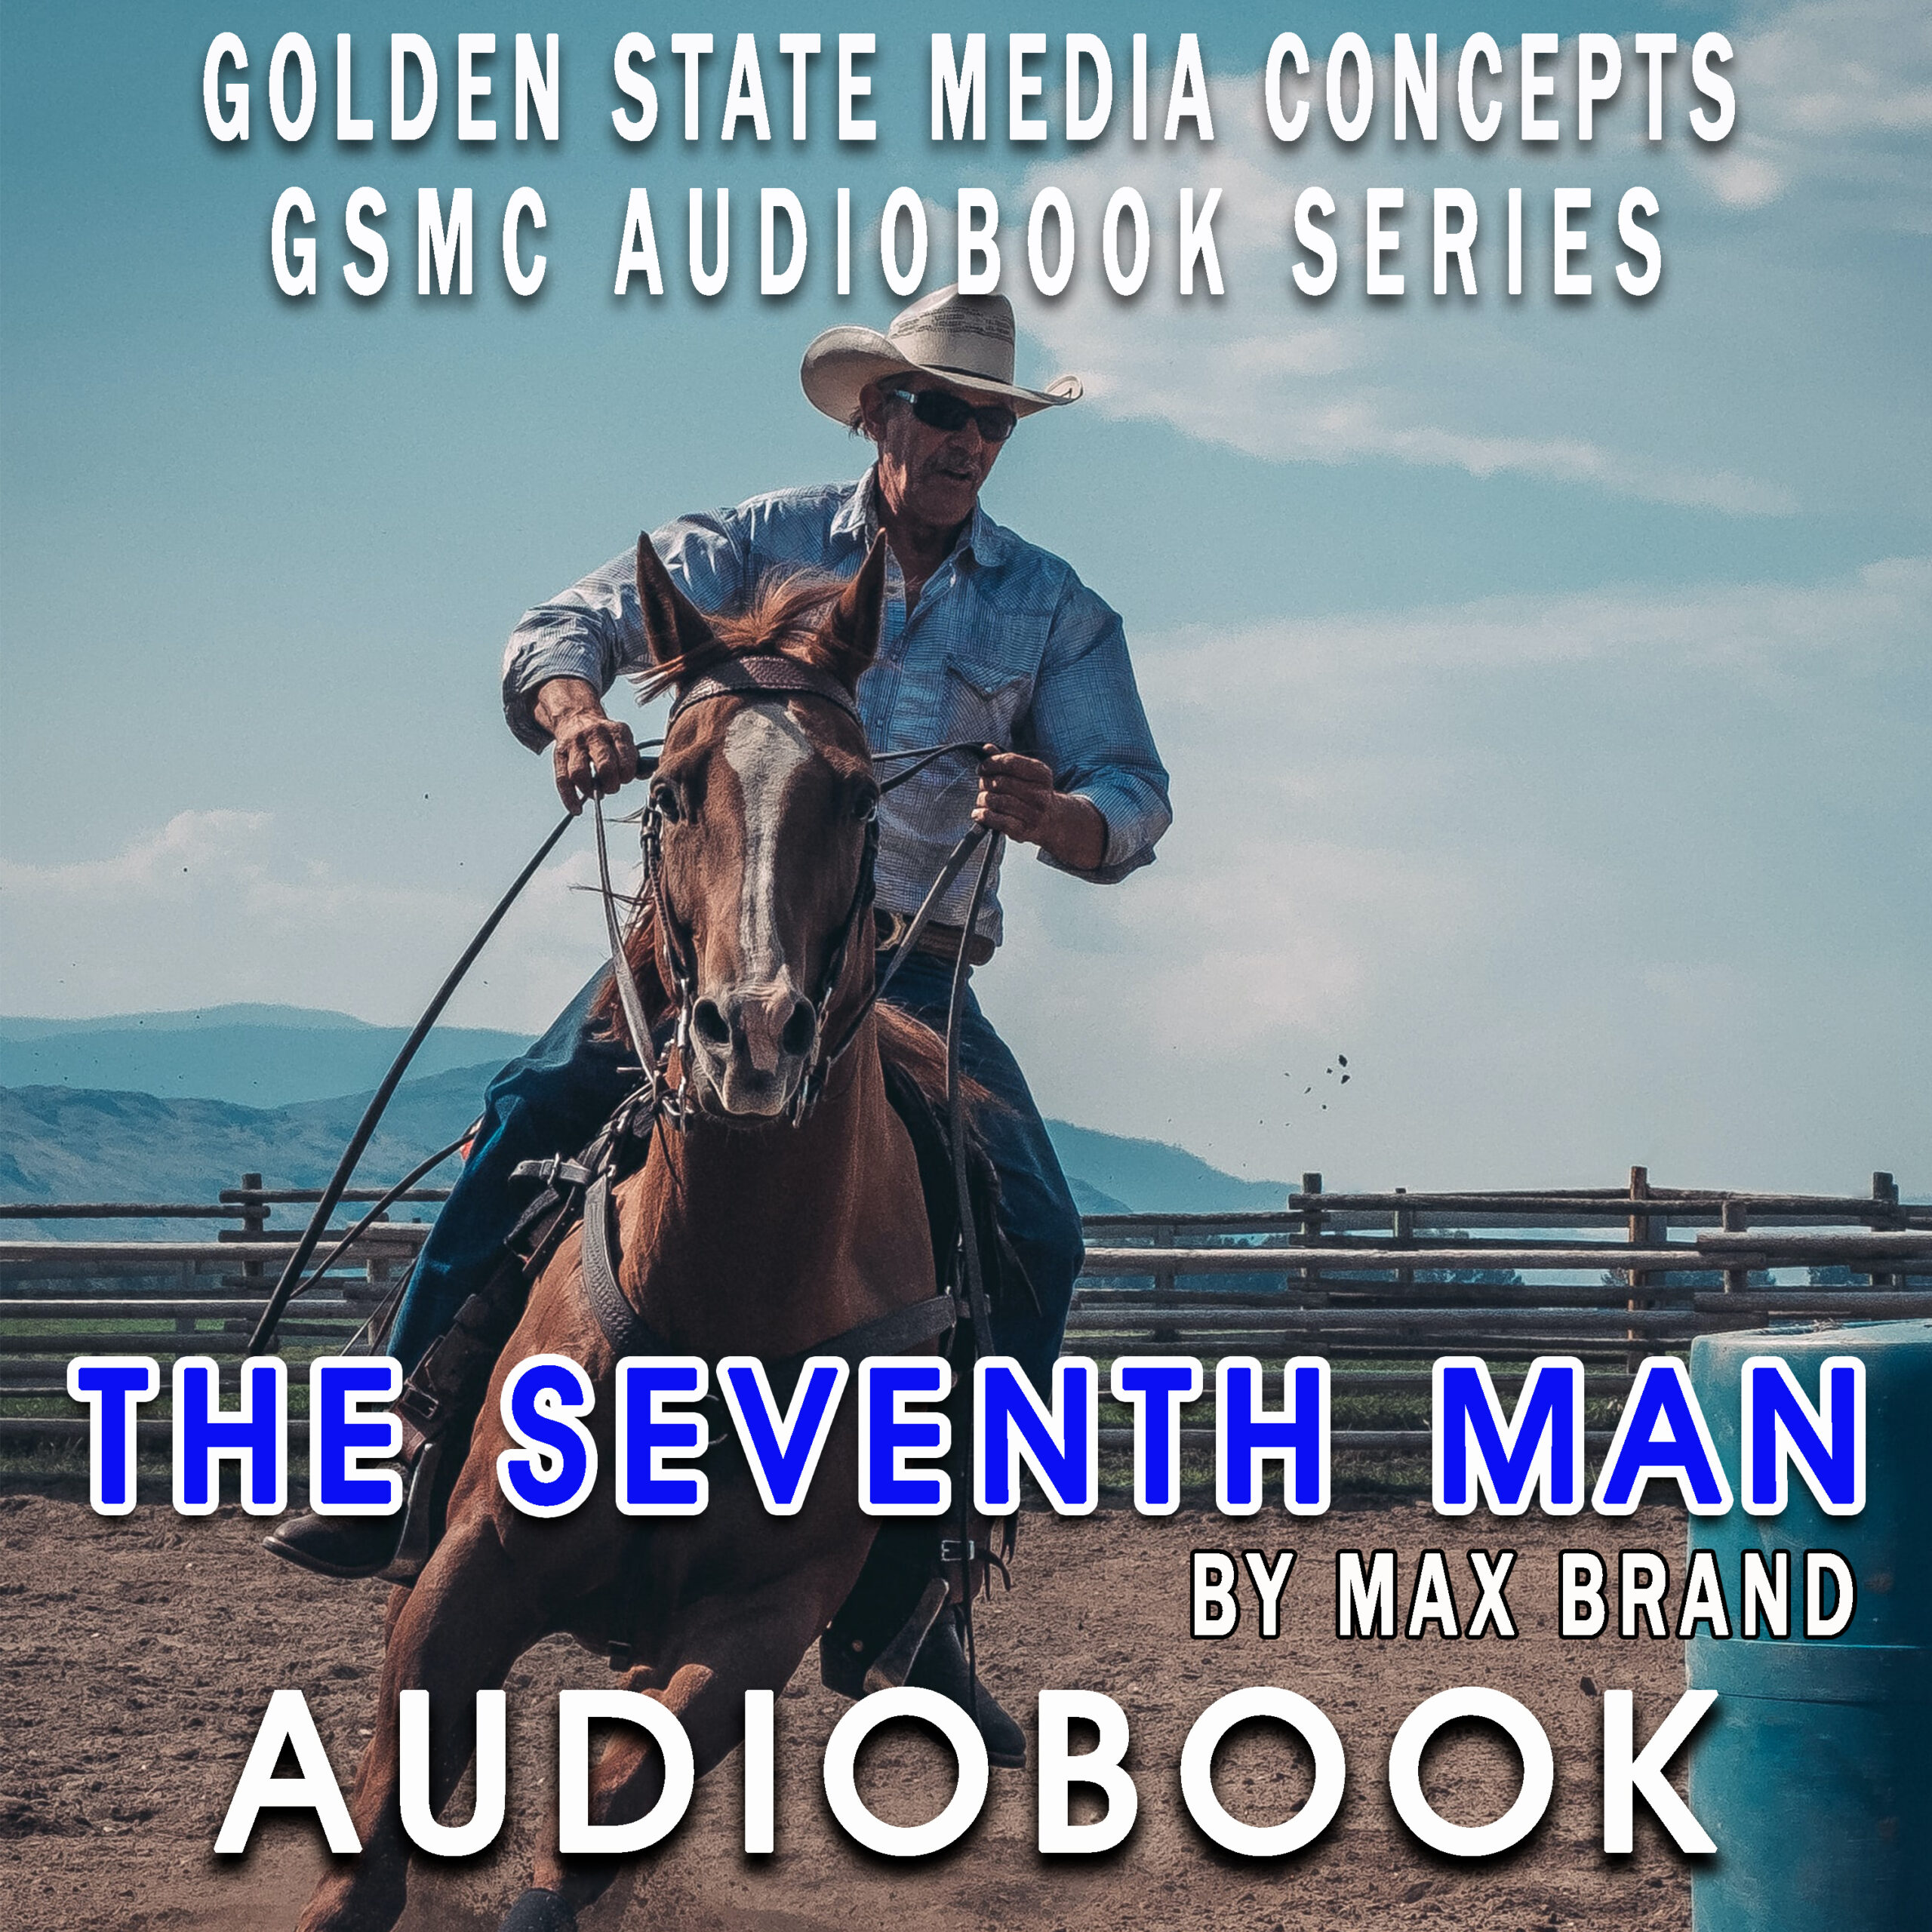 GSMC Audiobook Series: The Seventh Man by Max Brand